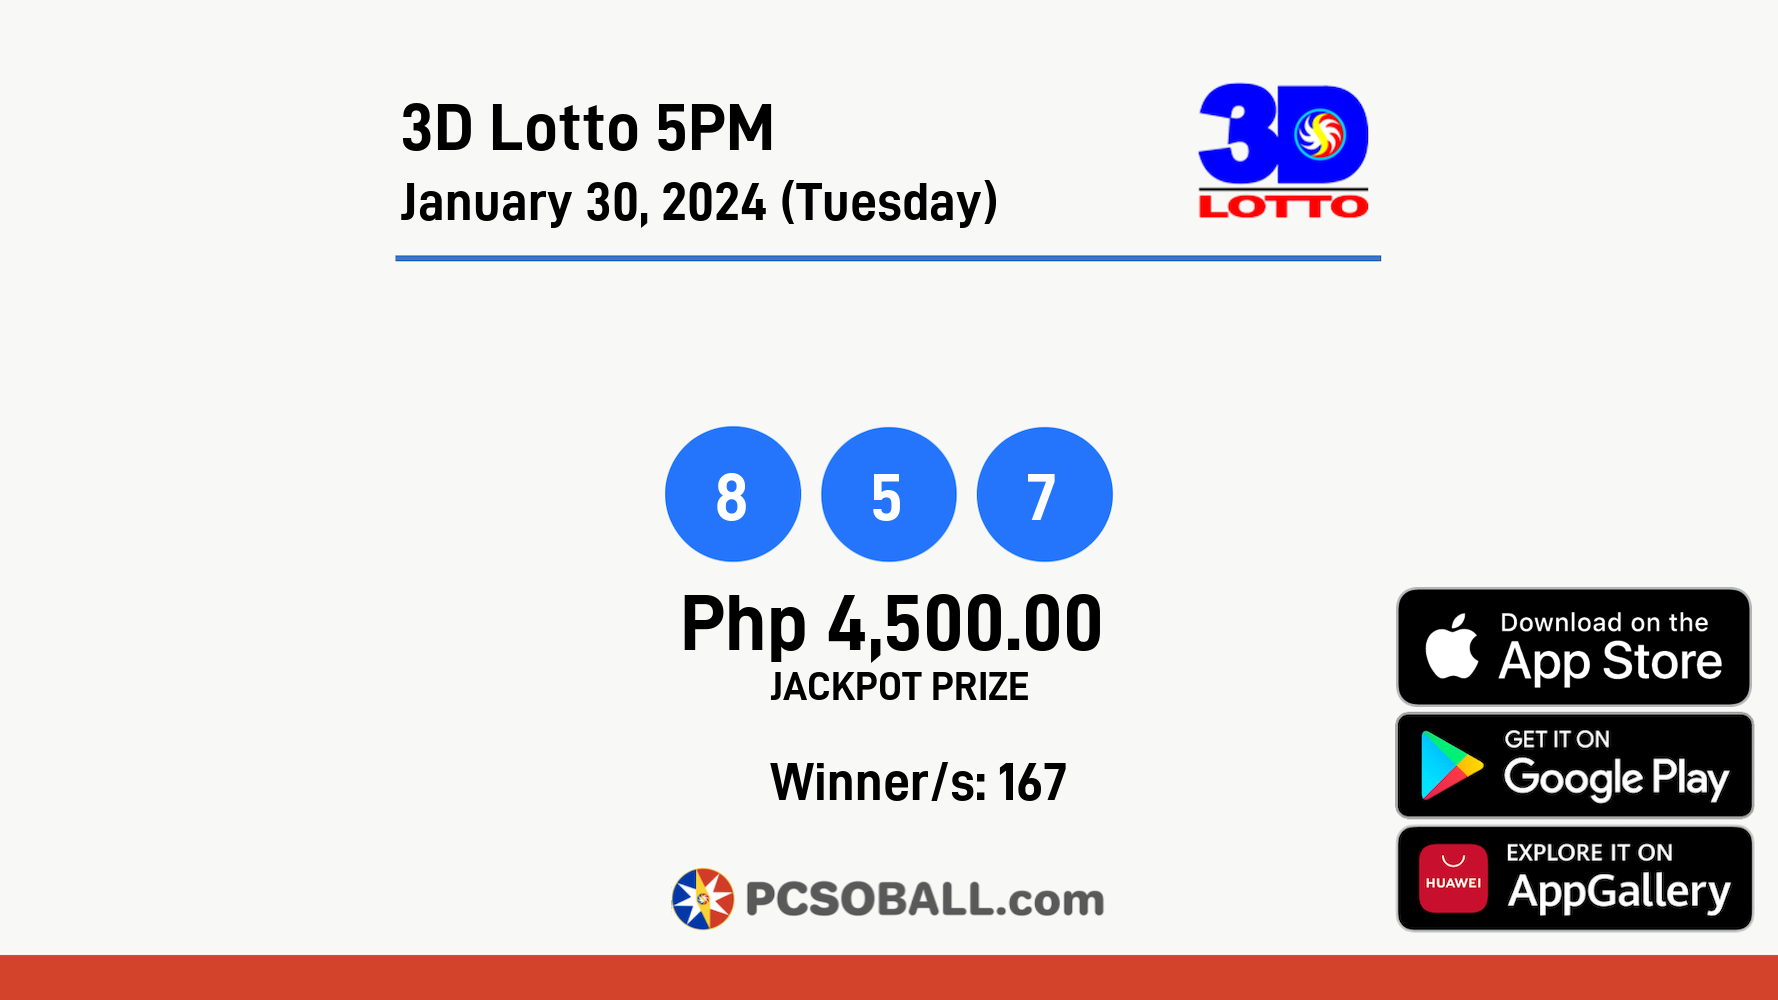 3D Lotto 5PM January 30, 2024 (Tuesday) Result